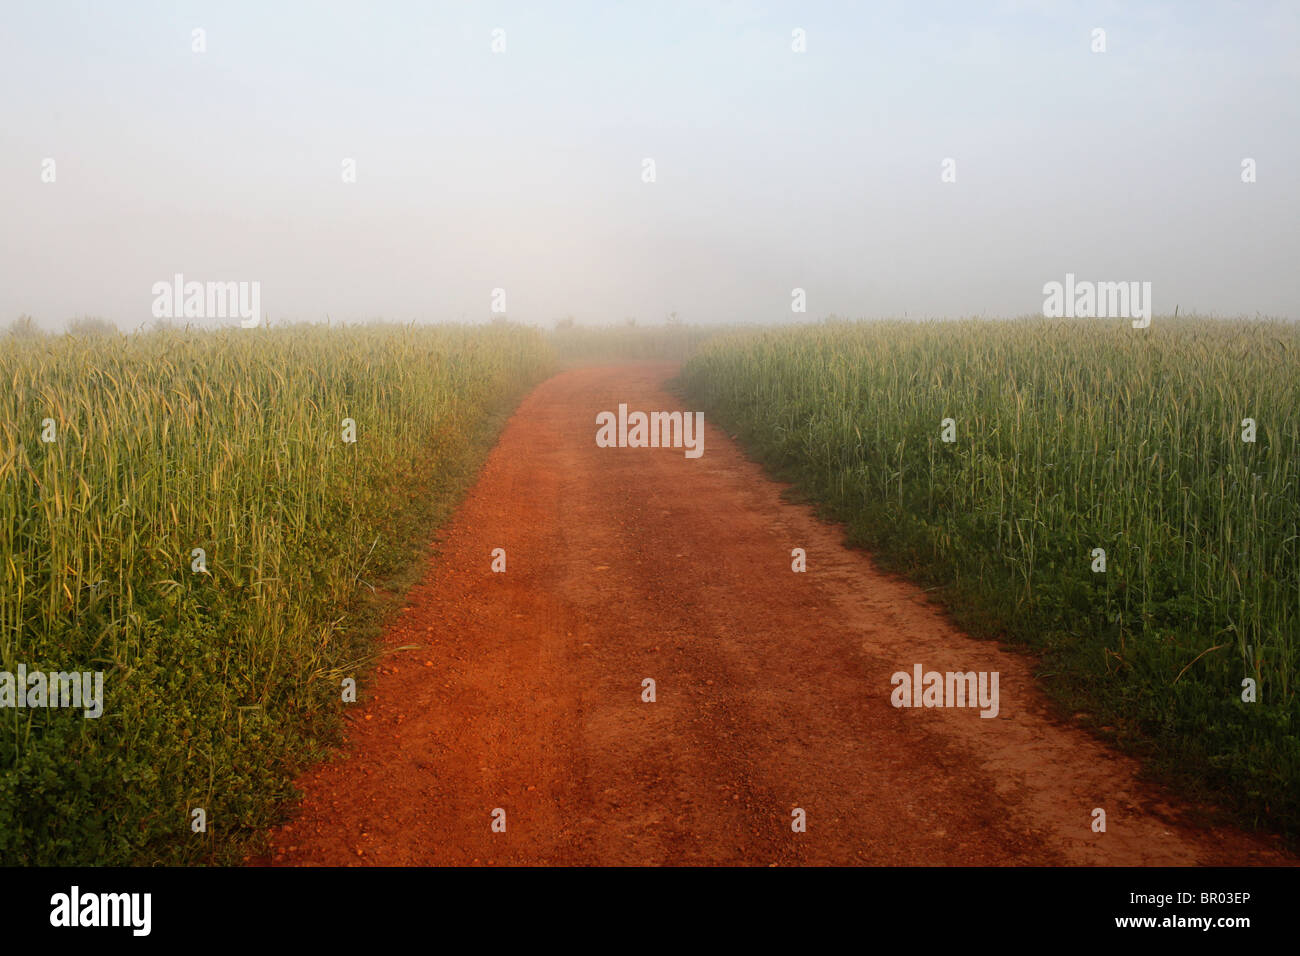 Rural dirt road in a wheat field Stock Photo